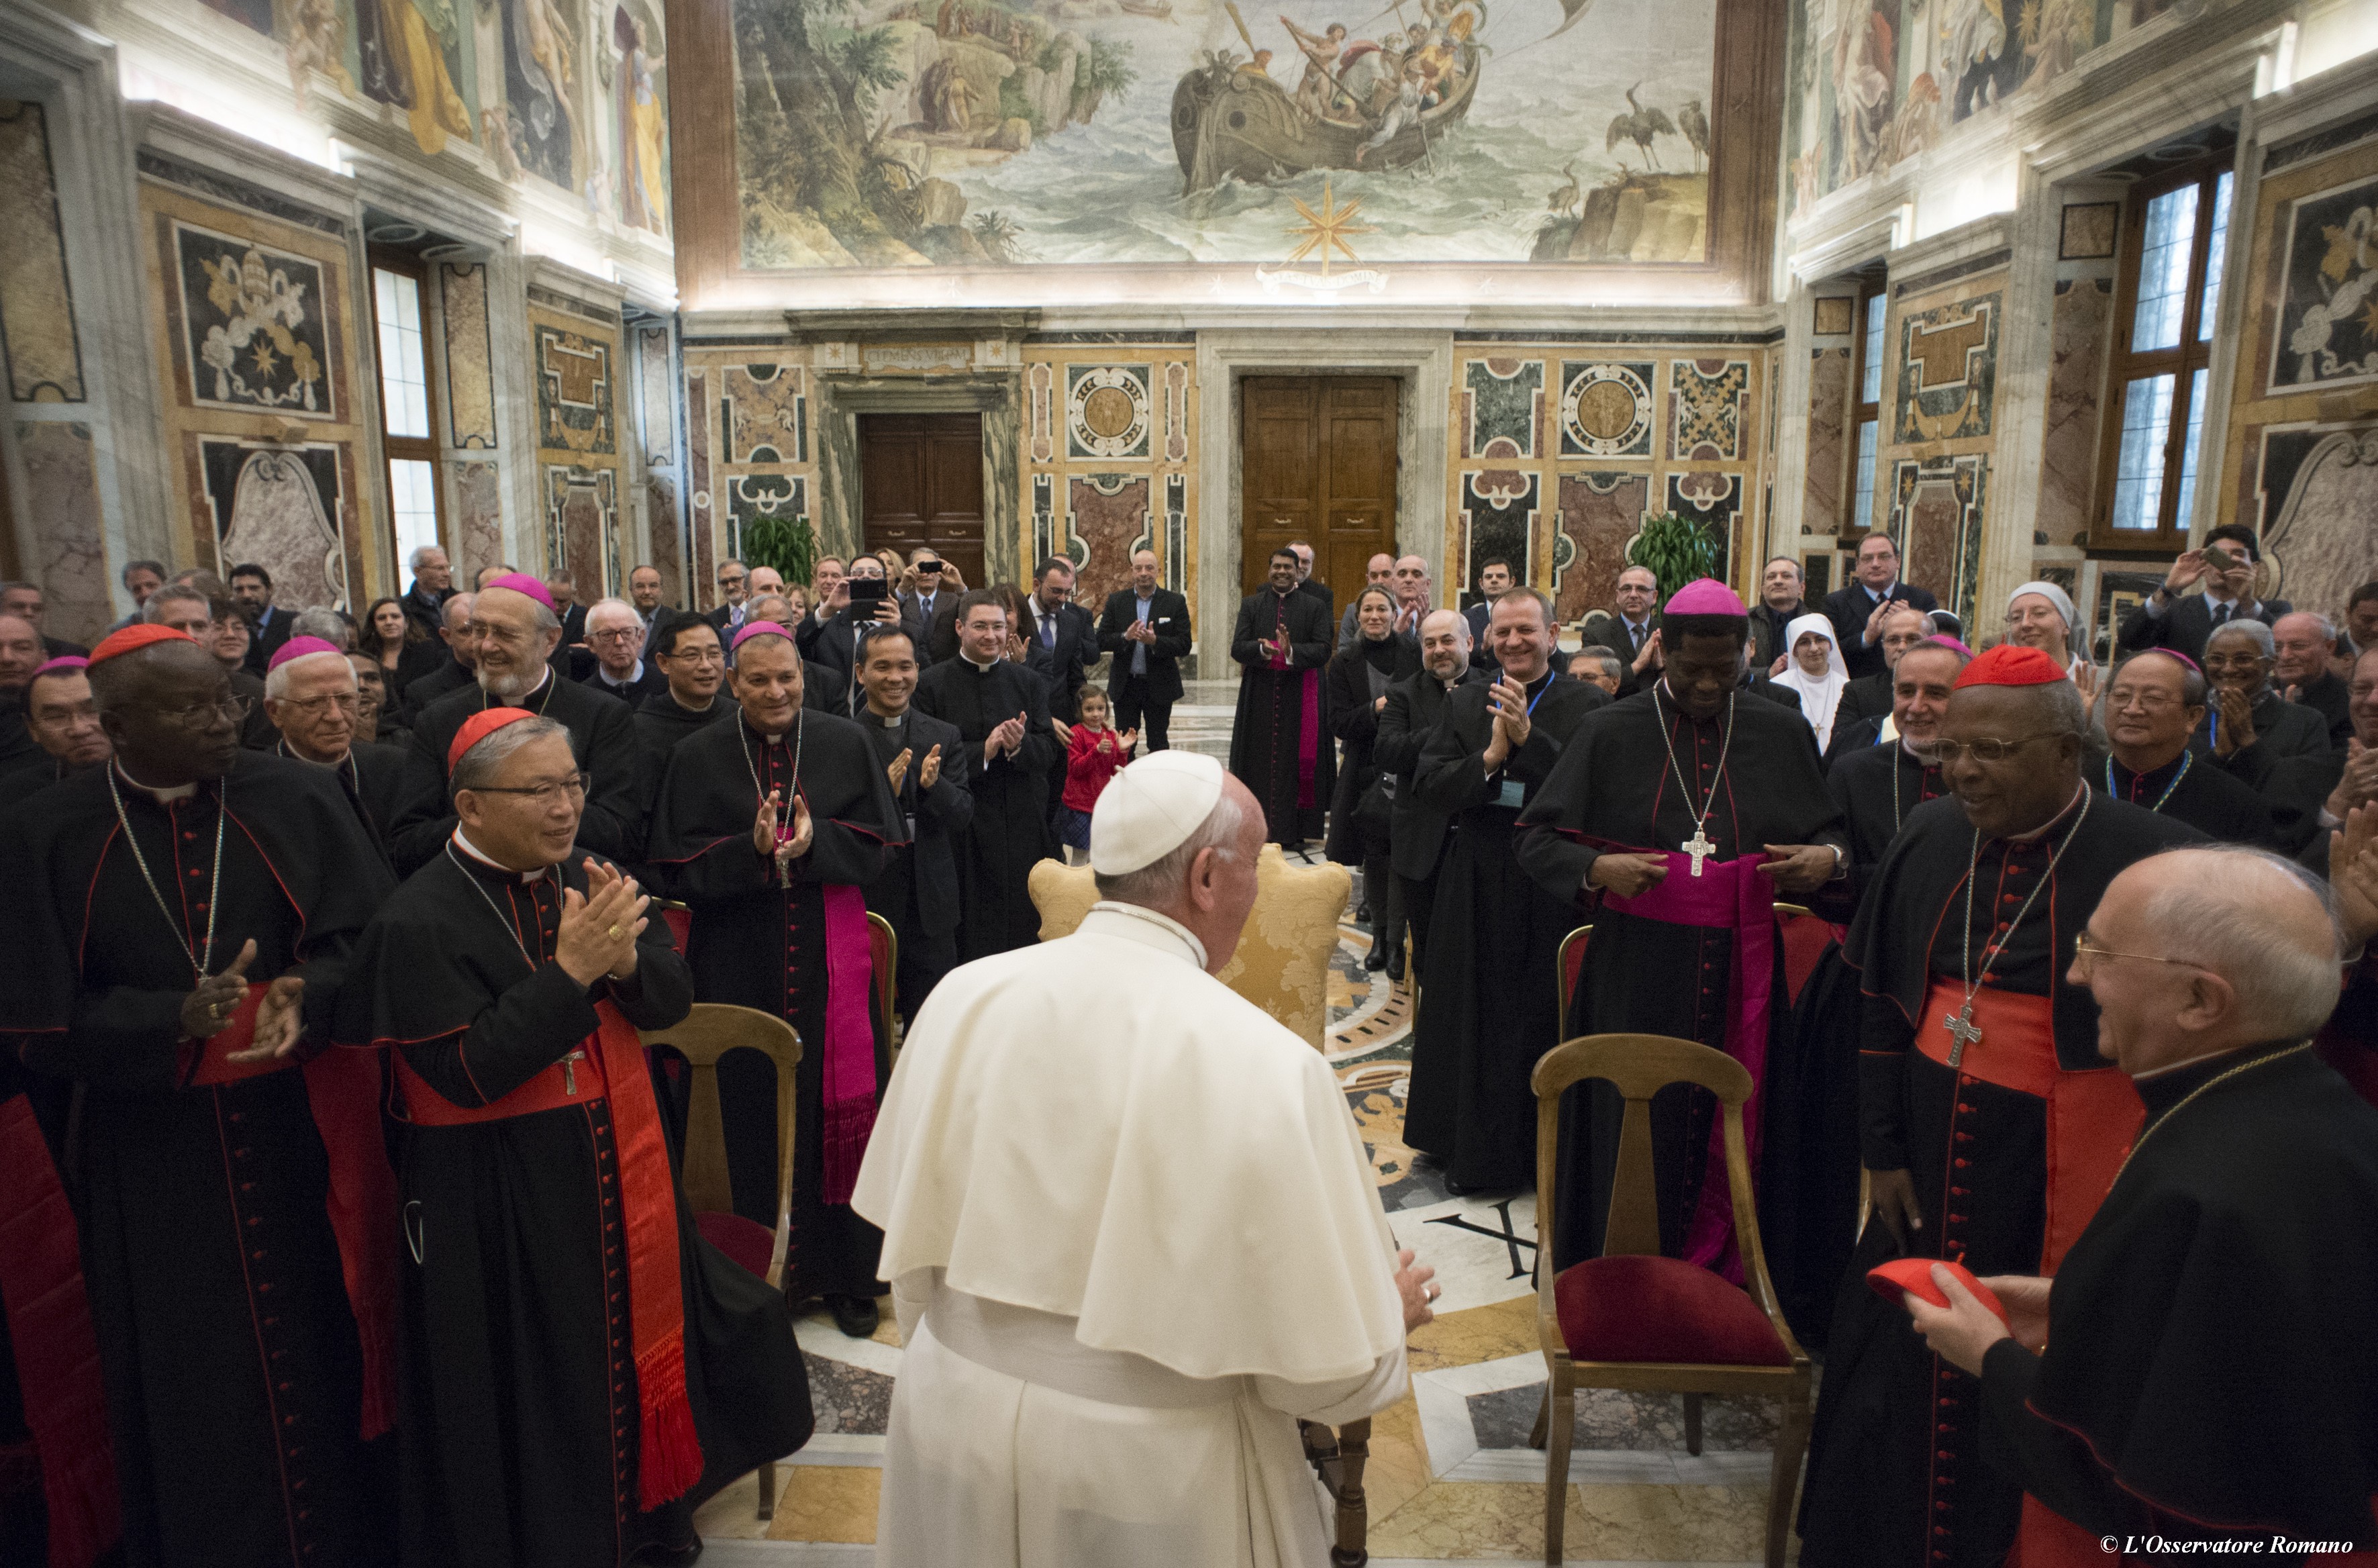 Papal audience to the participants of the XIX Plenary Assembly of the Congregation for the Evangelization of Peoples in the Vatican